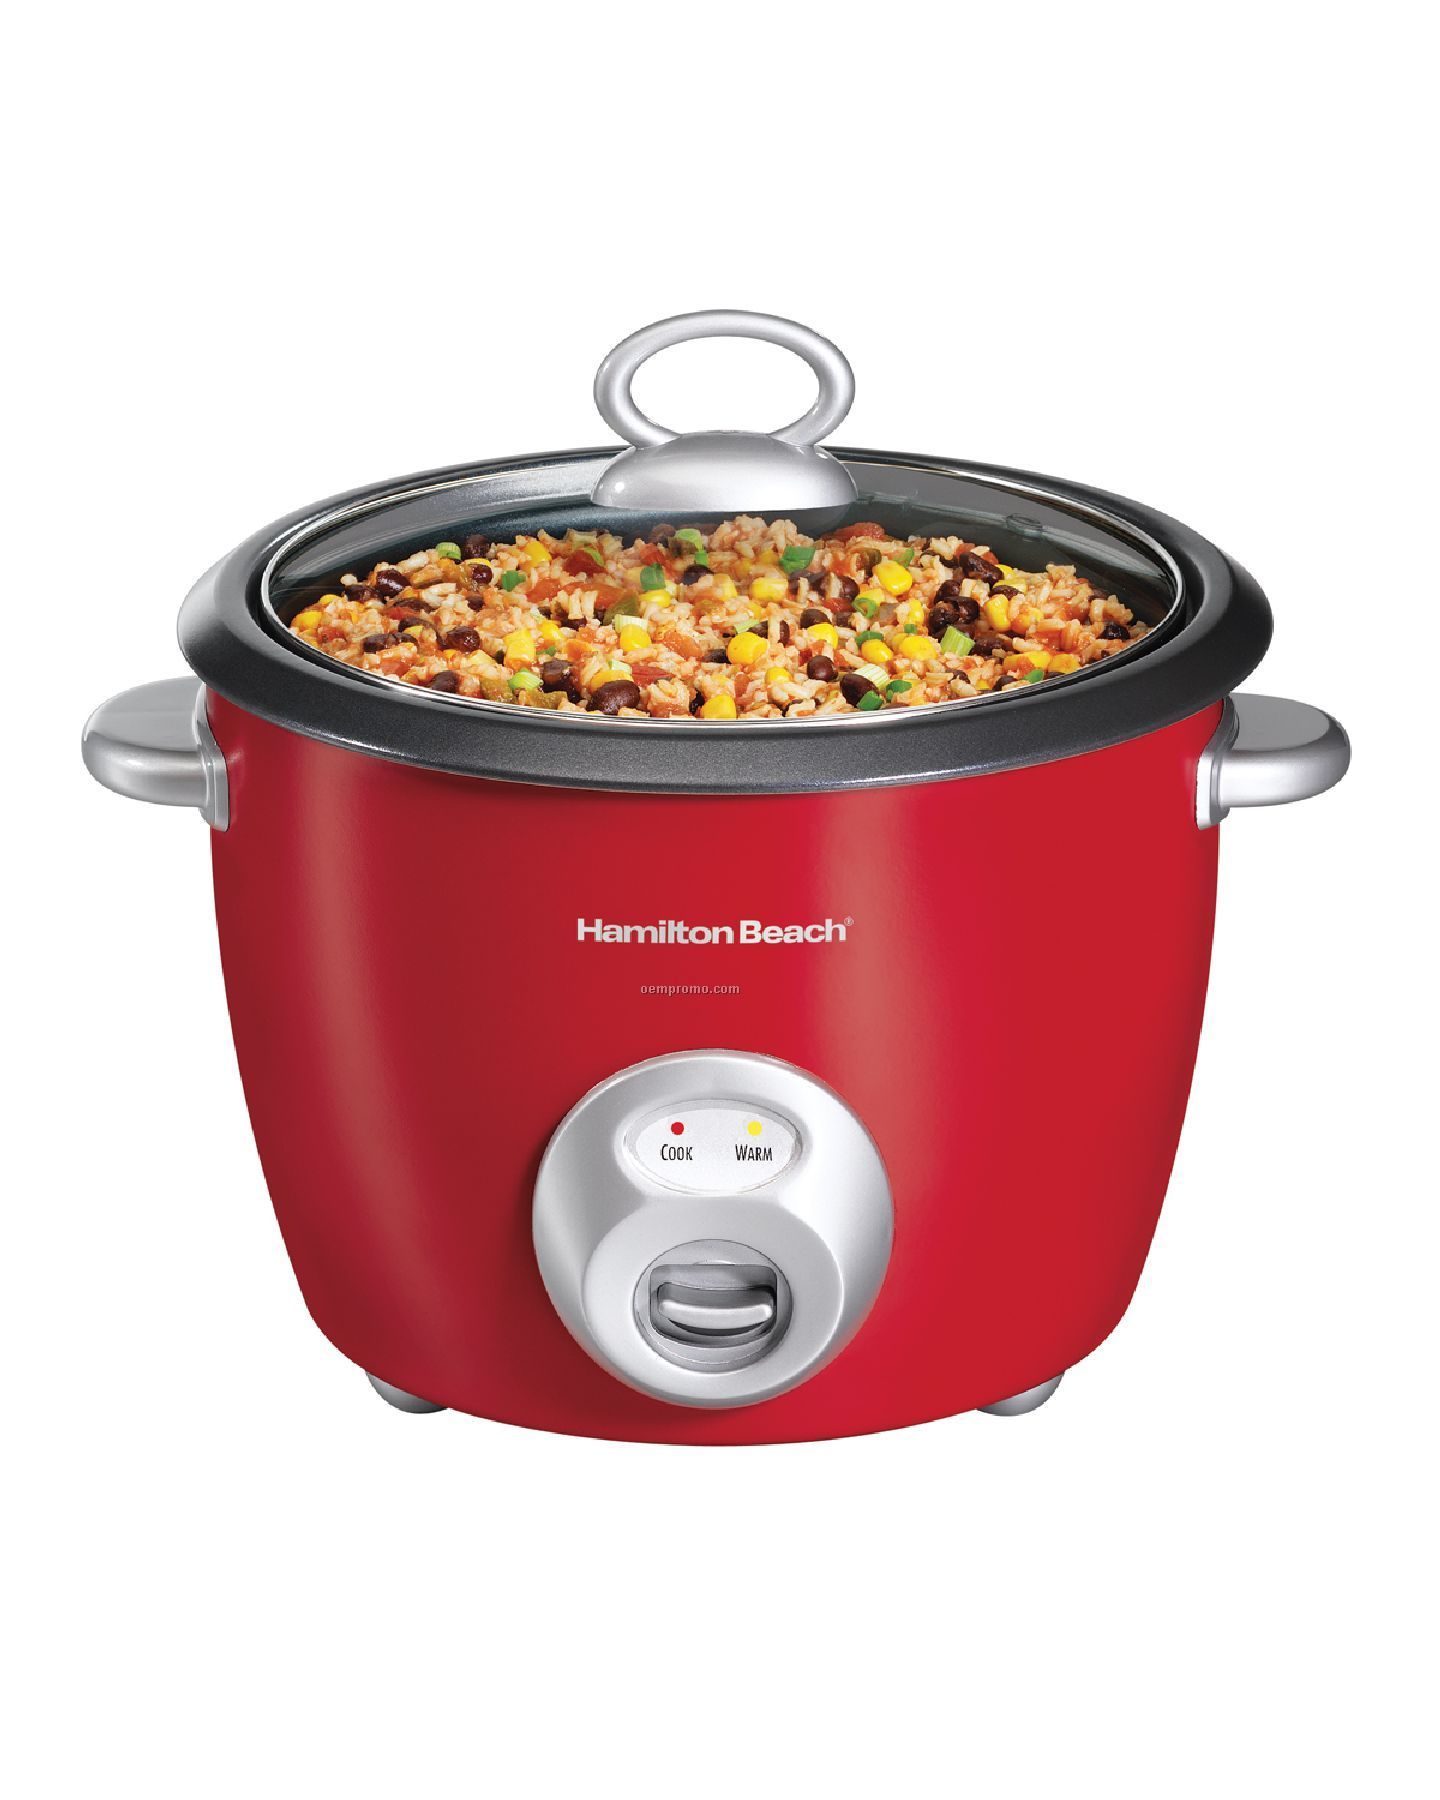 Hamilton Beach - Rice Cookers - Ensemble Red Rice Cooker